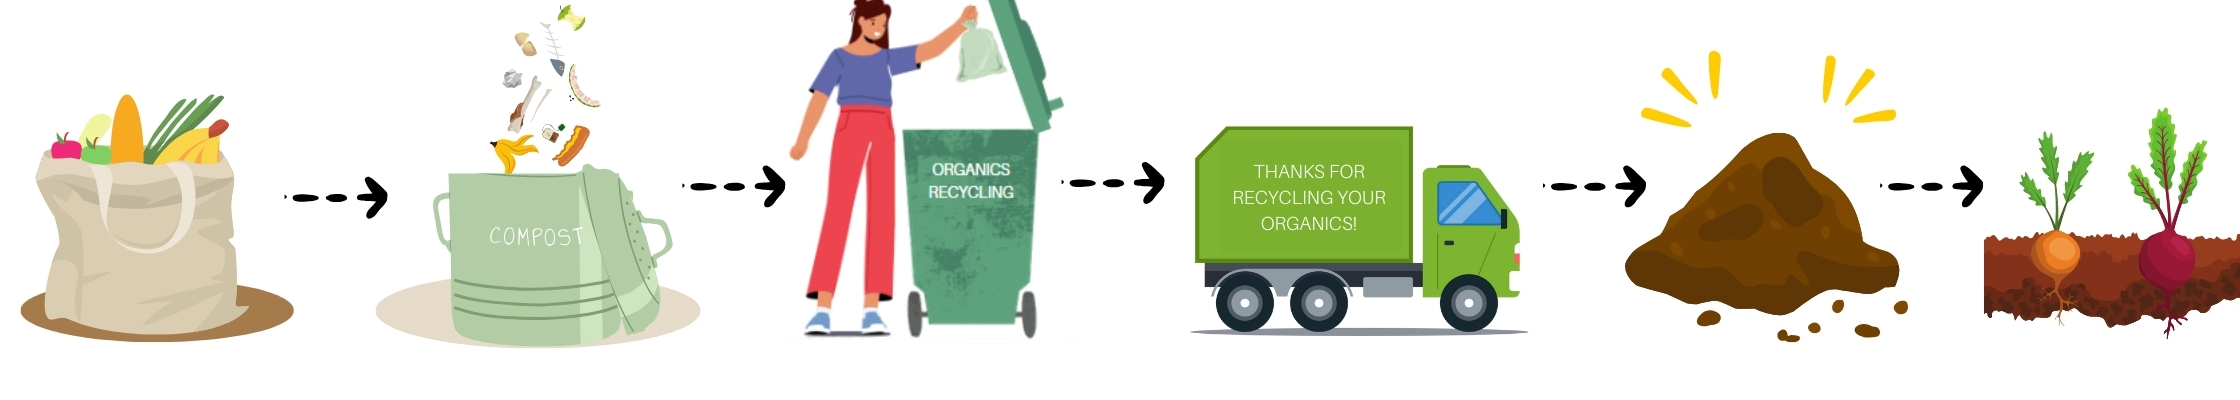 banner showing organics recycling process